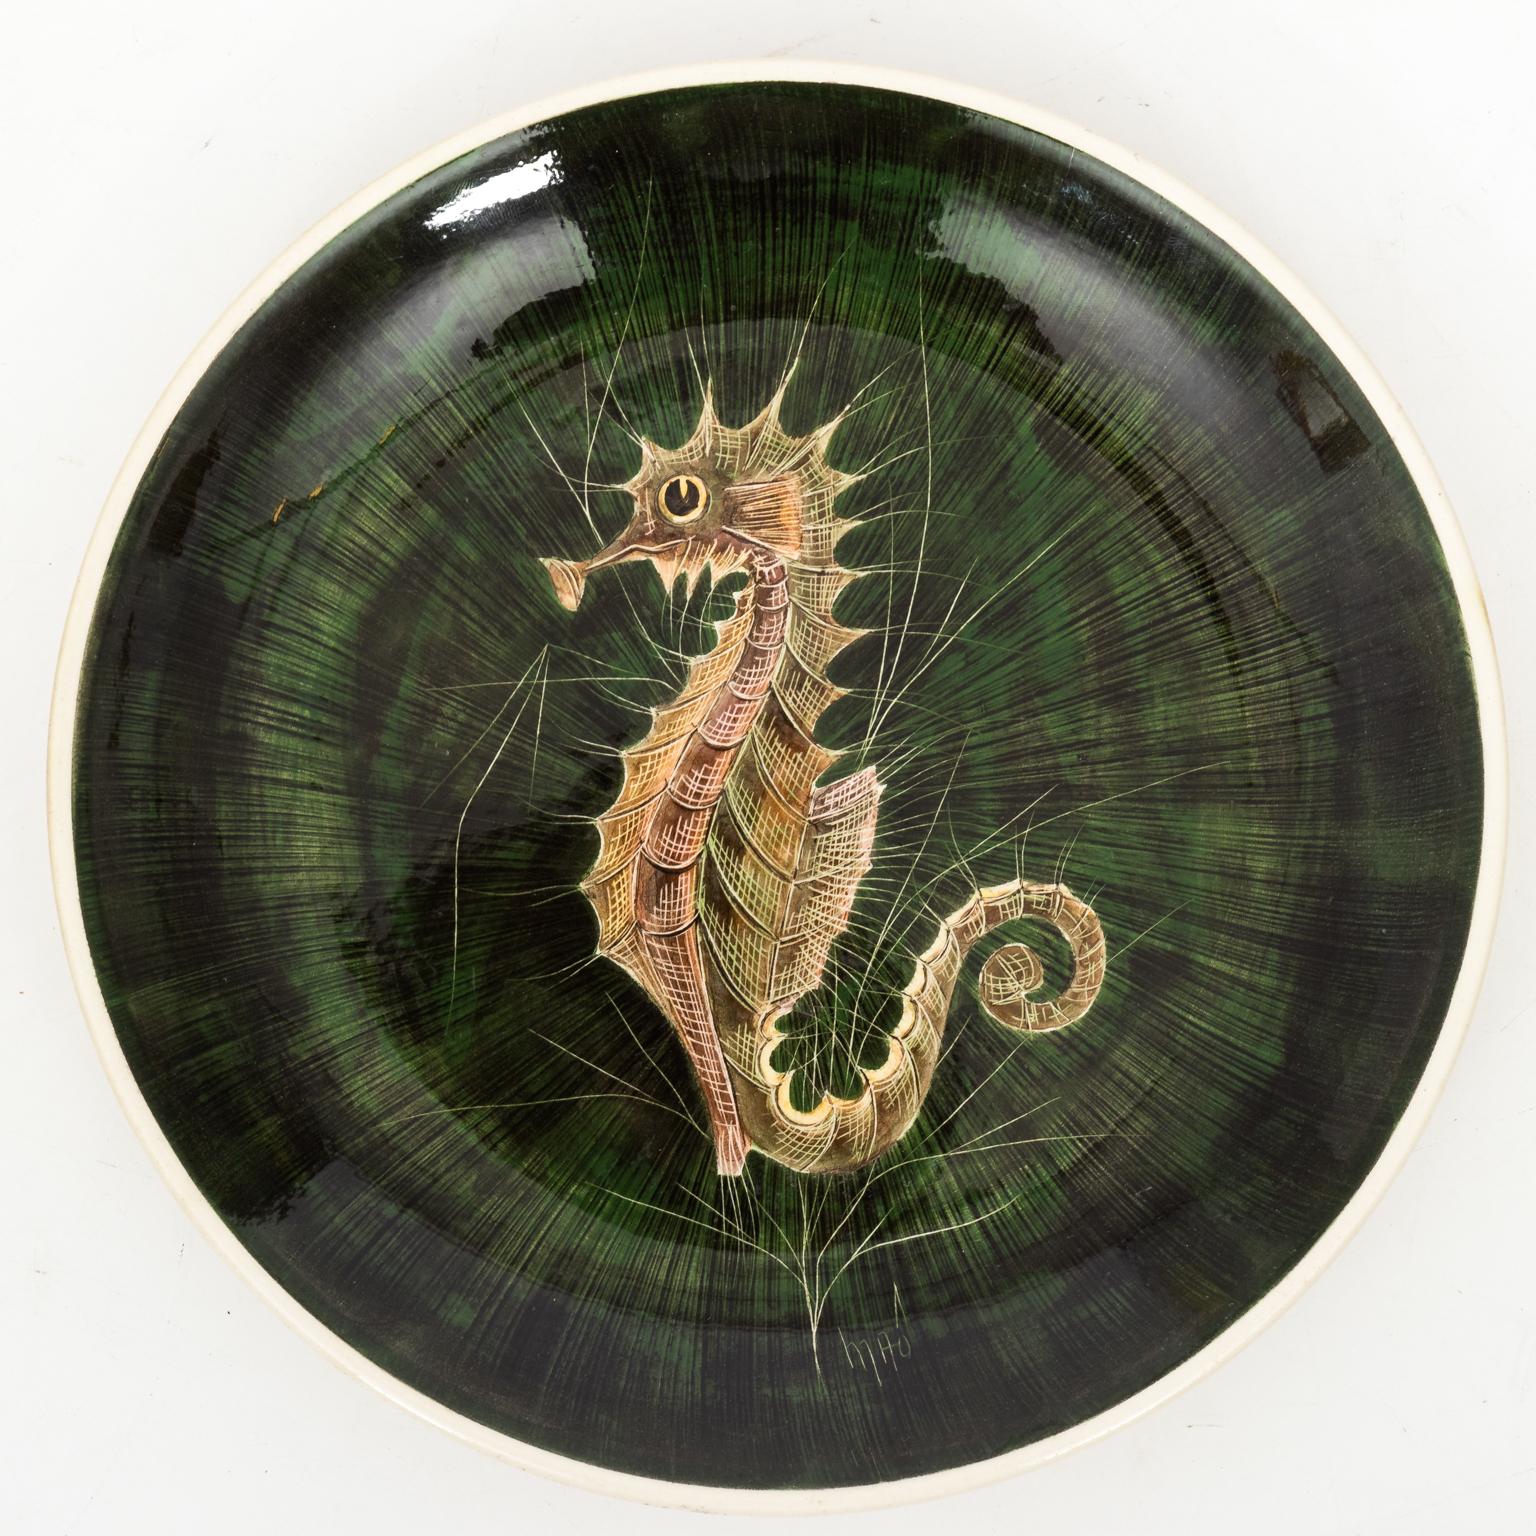 Set of French painted plates by artist Maoi depicting detailed sea life including seahorses, fish, and crabs, circa 1960. The set consists of one large platter and seven smaller plates. The size of the larger service plate is 24.00 inches wide by